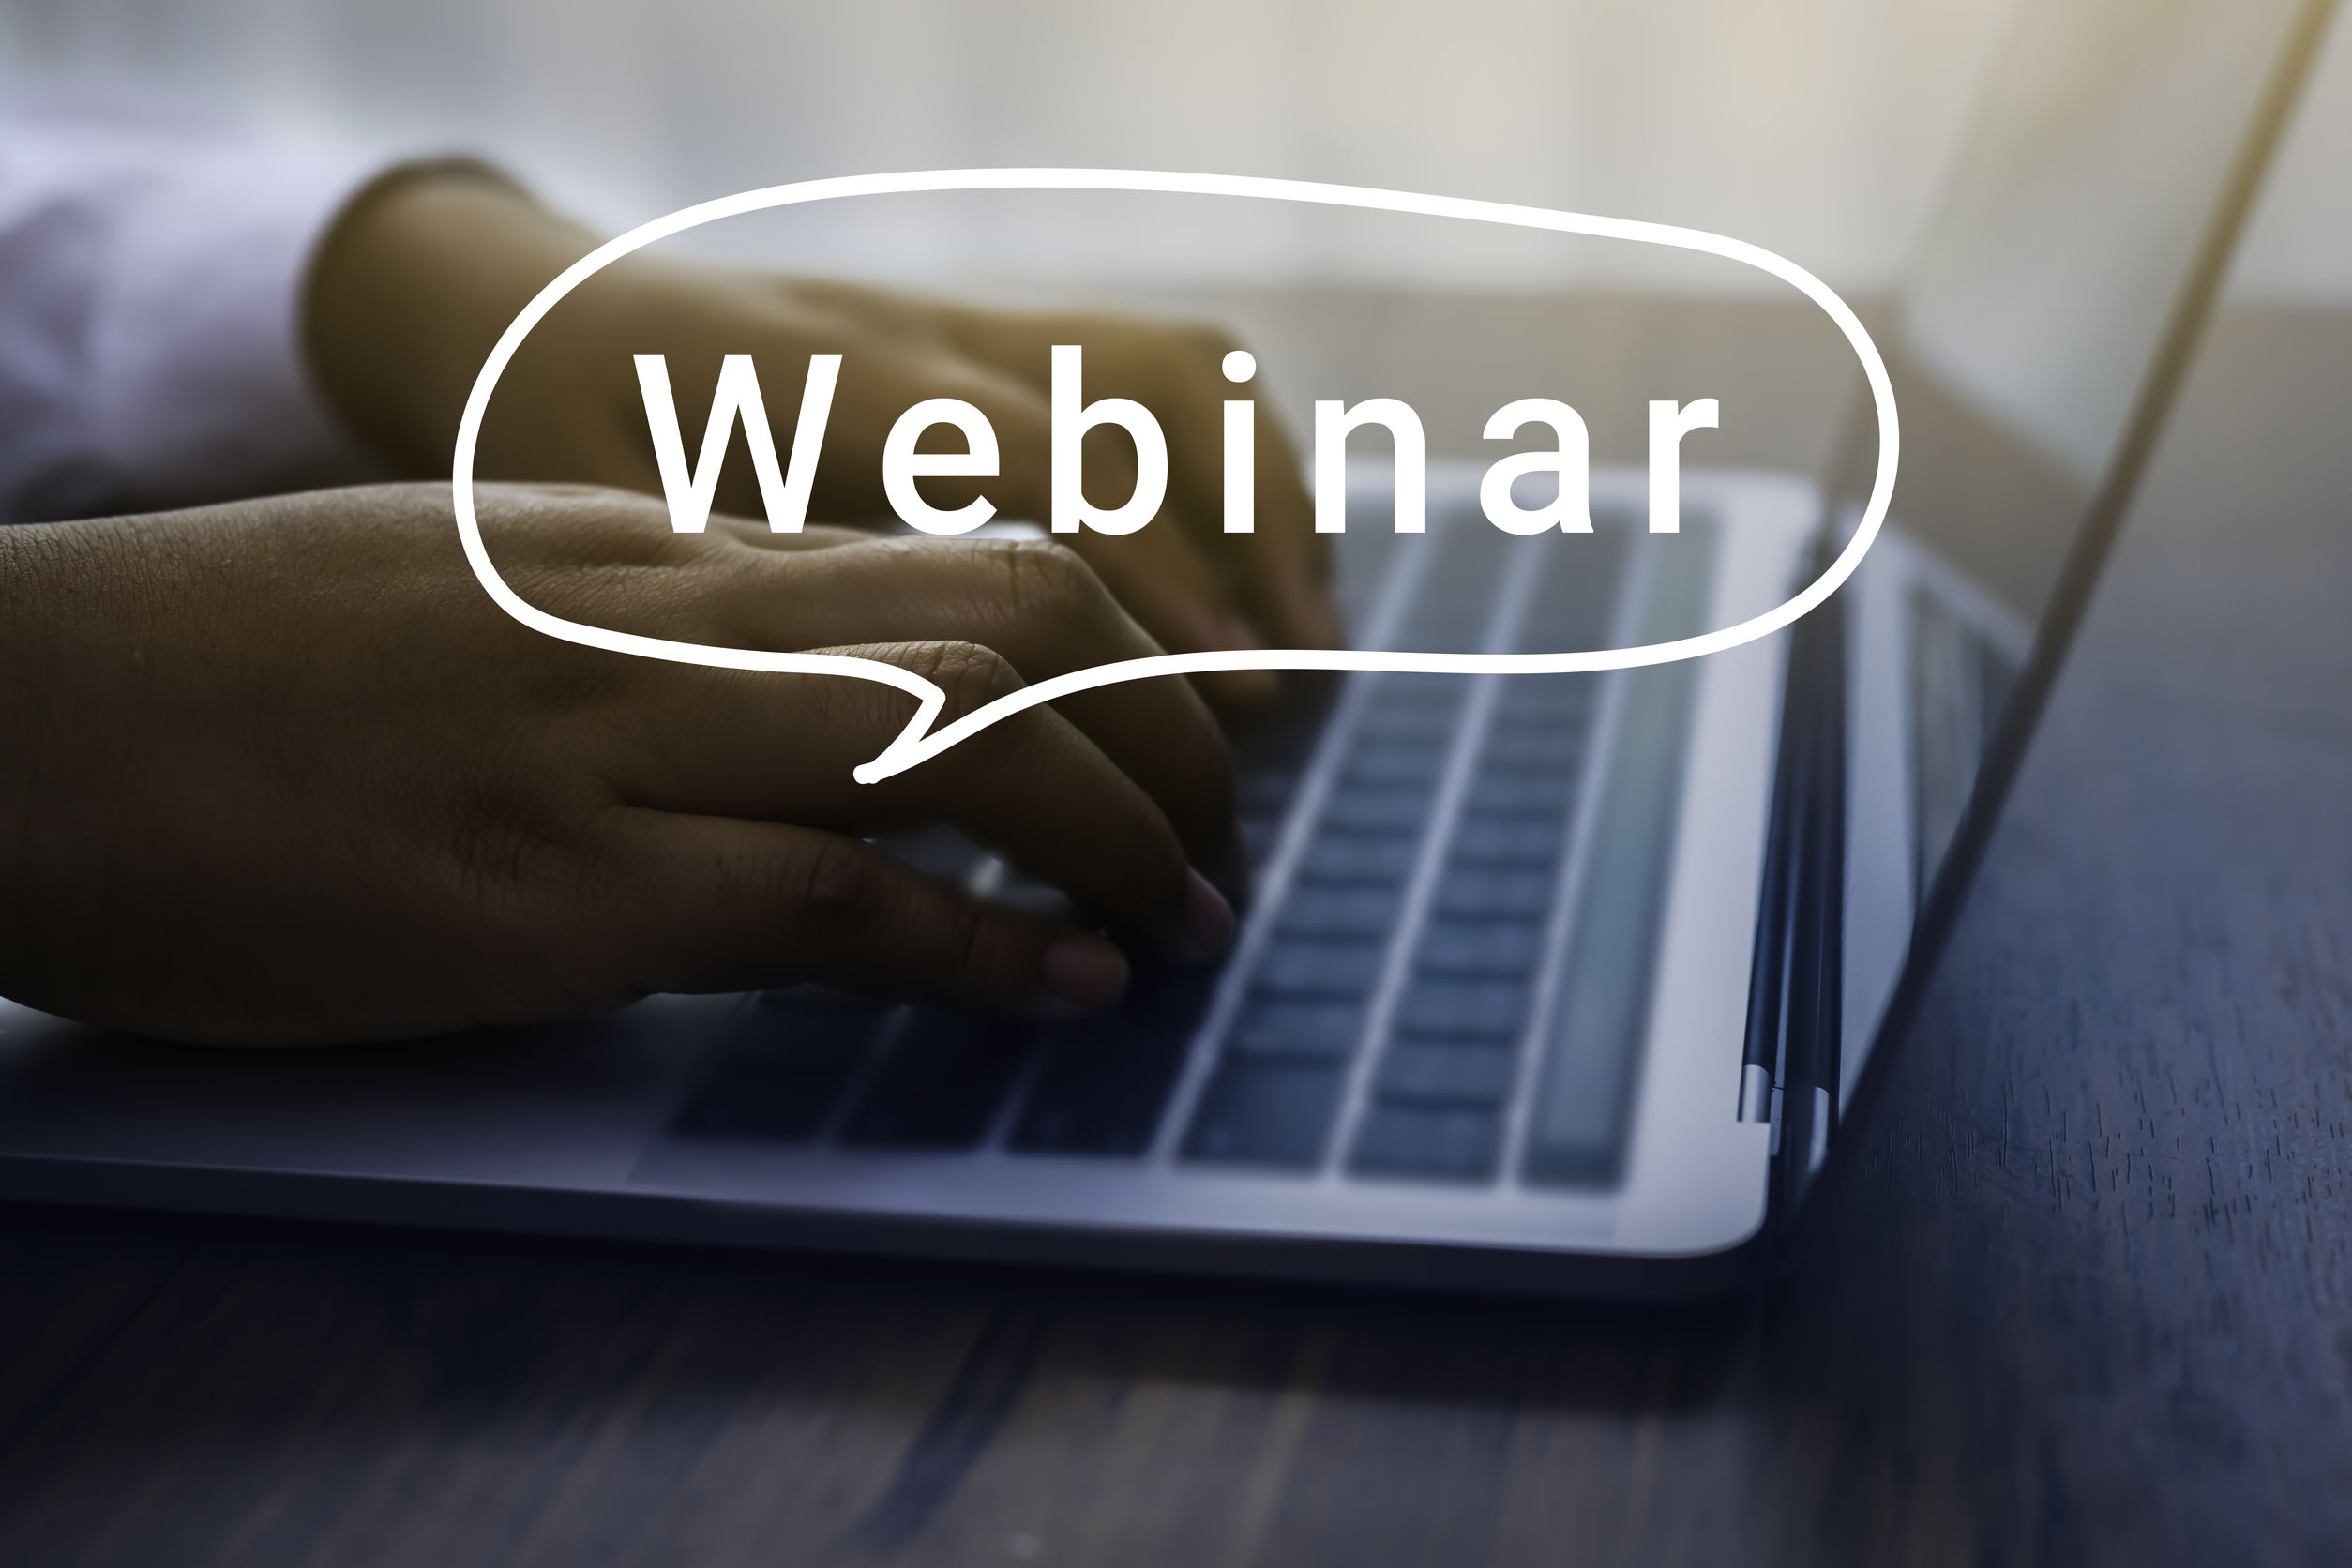 Set Your Business Up for Success in 2021 with Our December Webinars